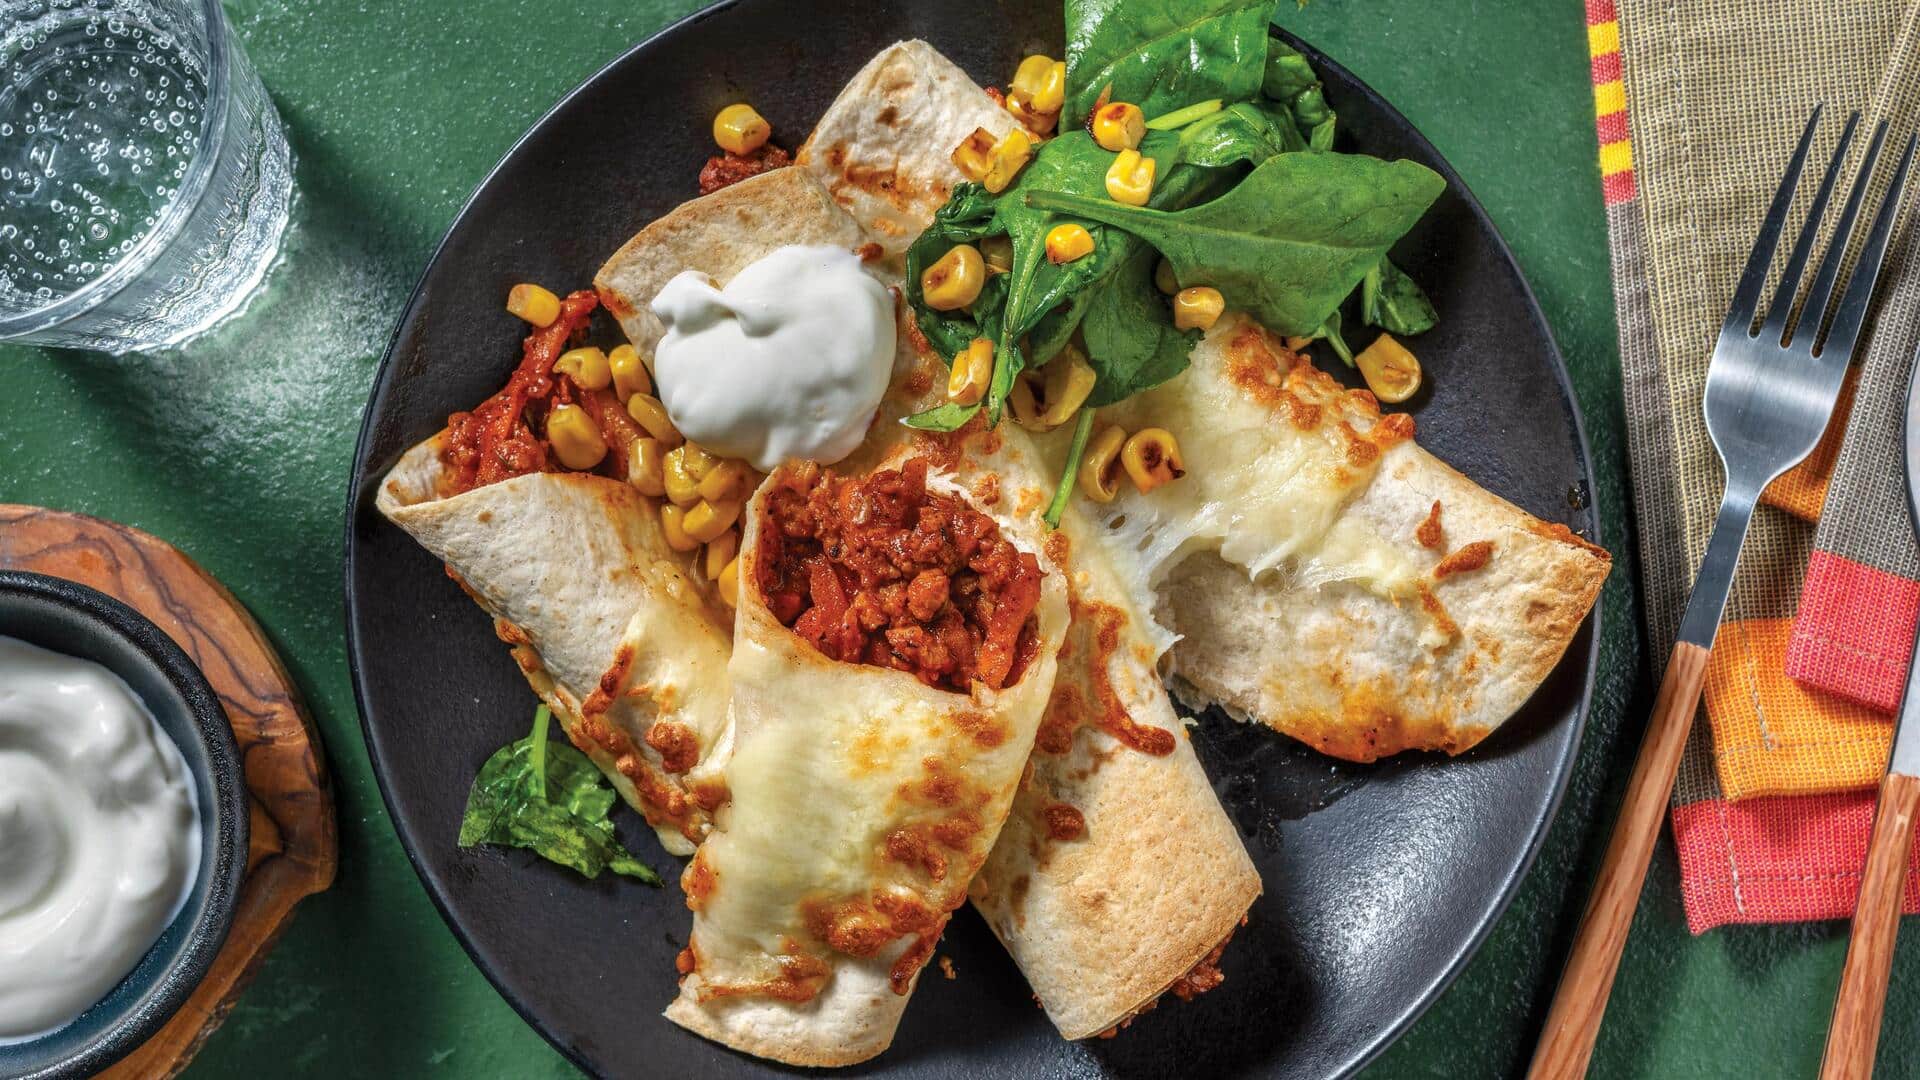 Mexican veggie enchiladas recipe: Your guests will love this dish